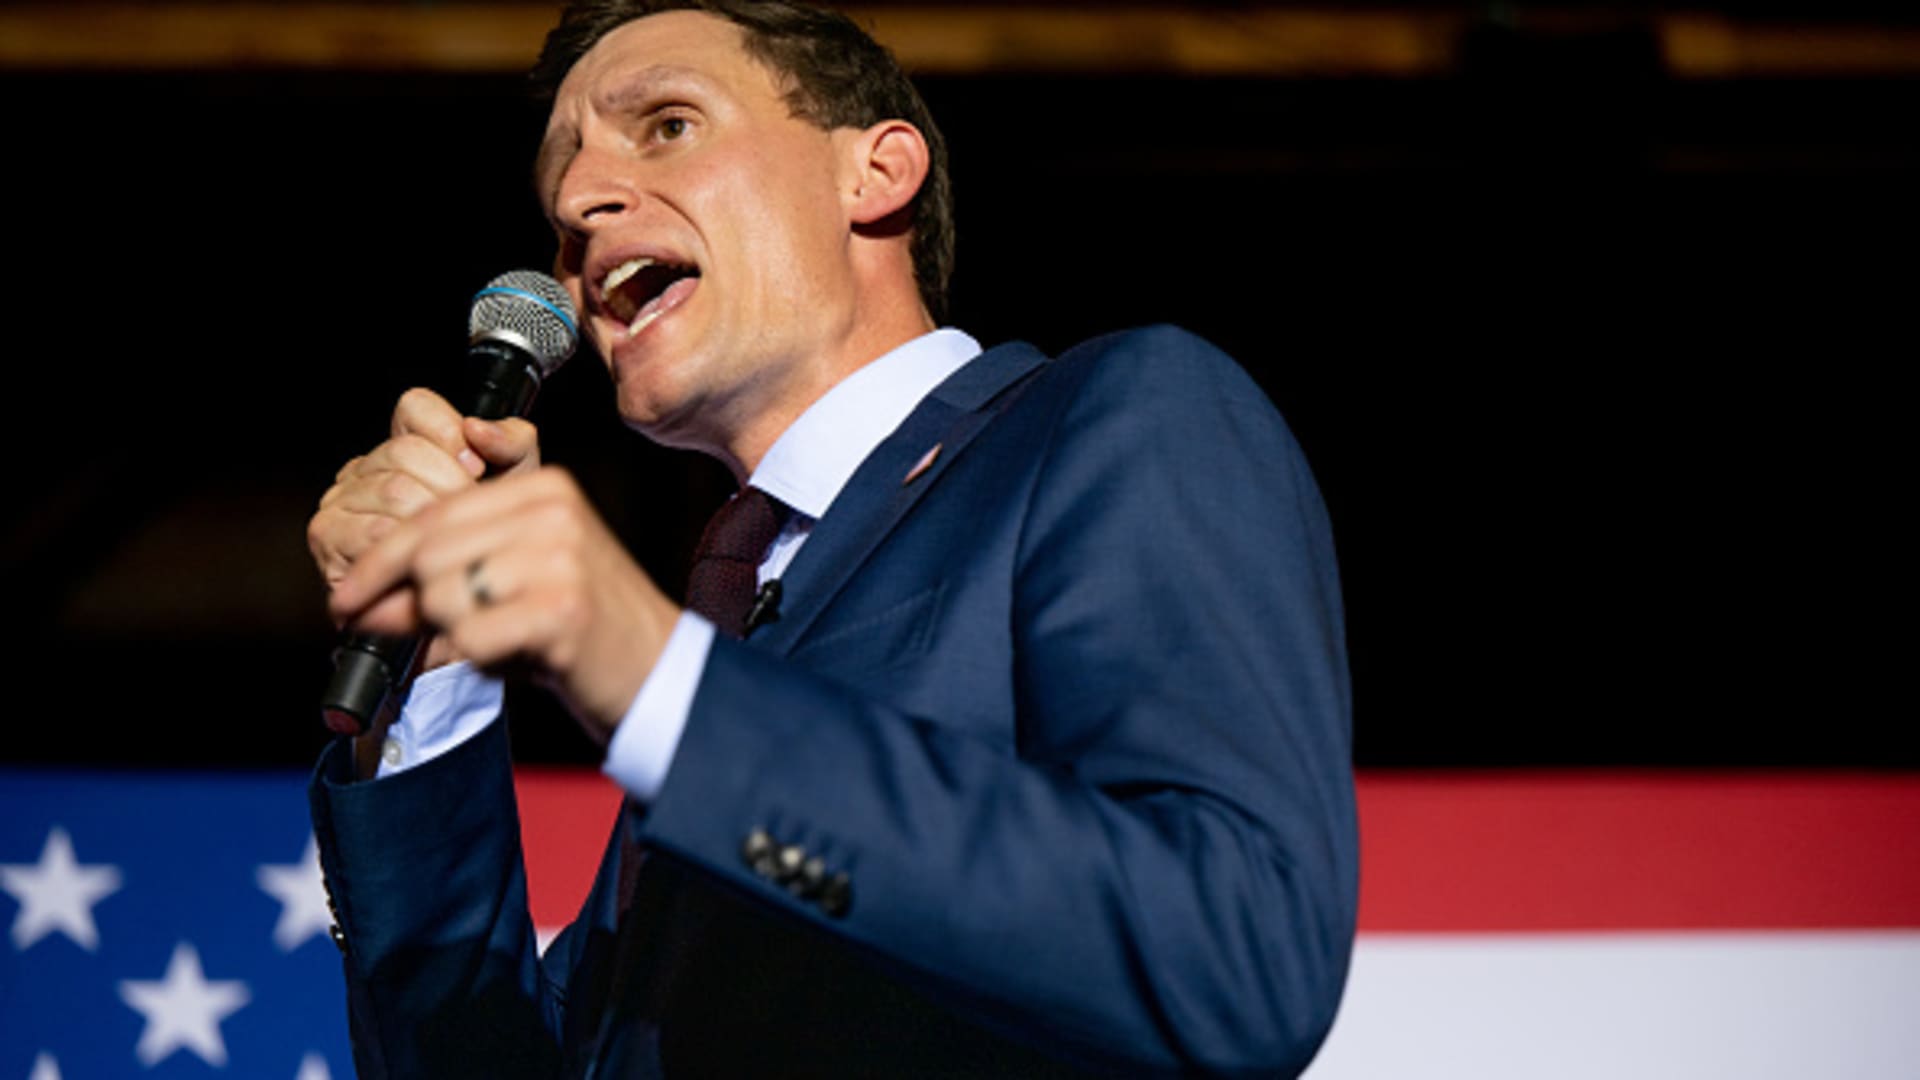 Republican U.S. senatorial candidate Blake Masters speaks at a campaign event on the eve of the primary, on August 01, 2022 in Phoenix, Arizona.